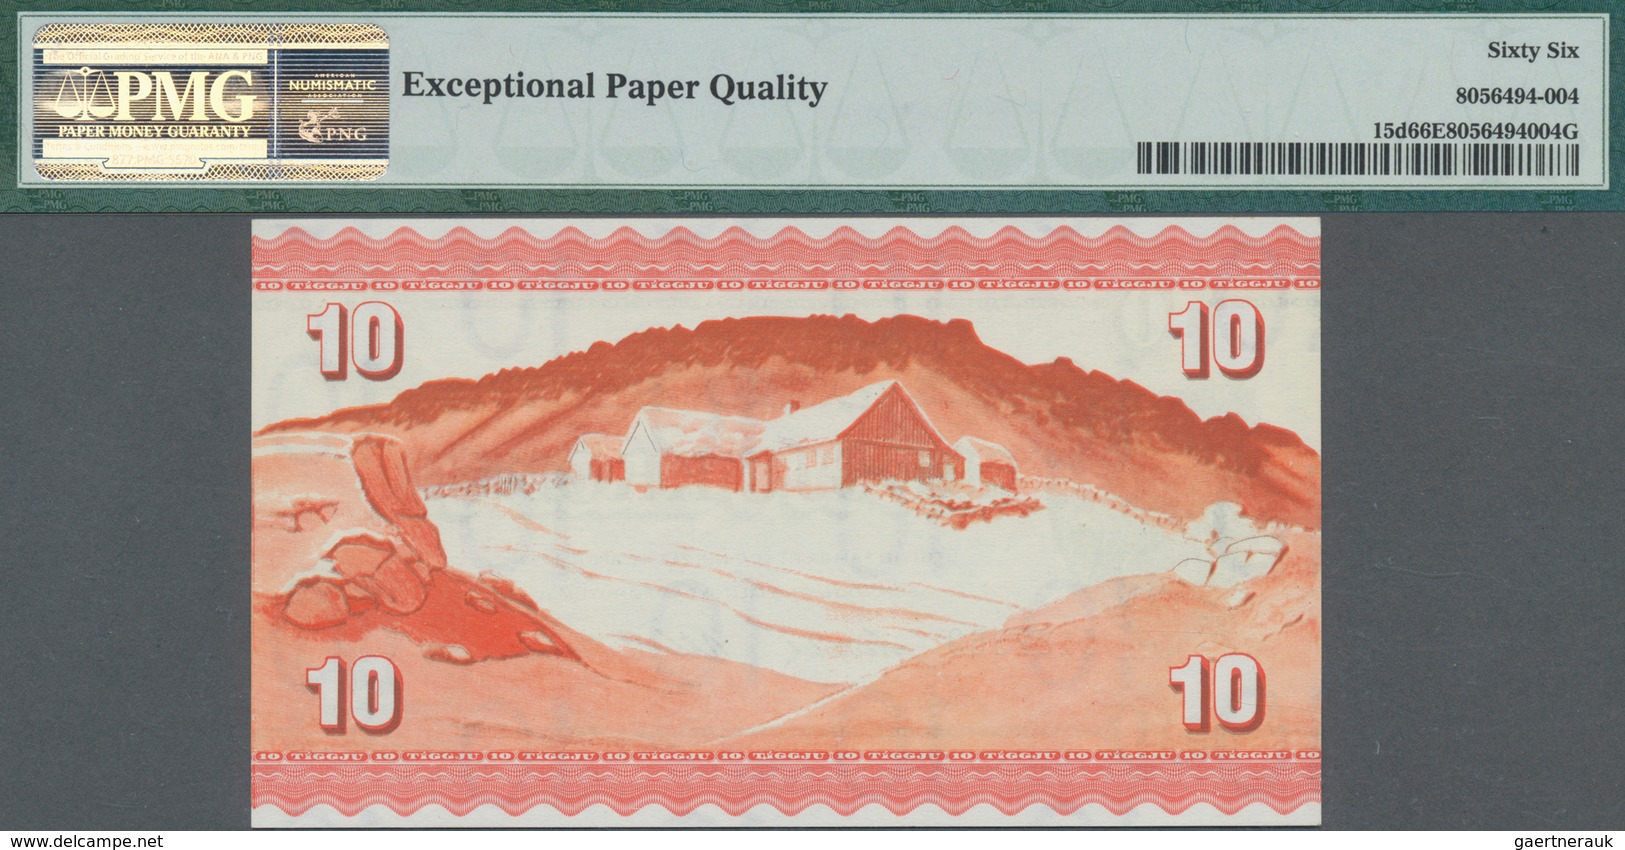 Faeroe Islands / Färöer: Lot with 4 banknotes containing 10 Kronur ND(1970-72) P.15d PMG 66 EPQ, 10